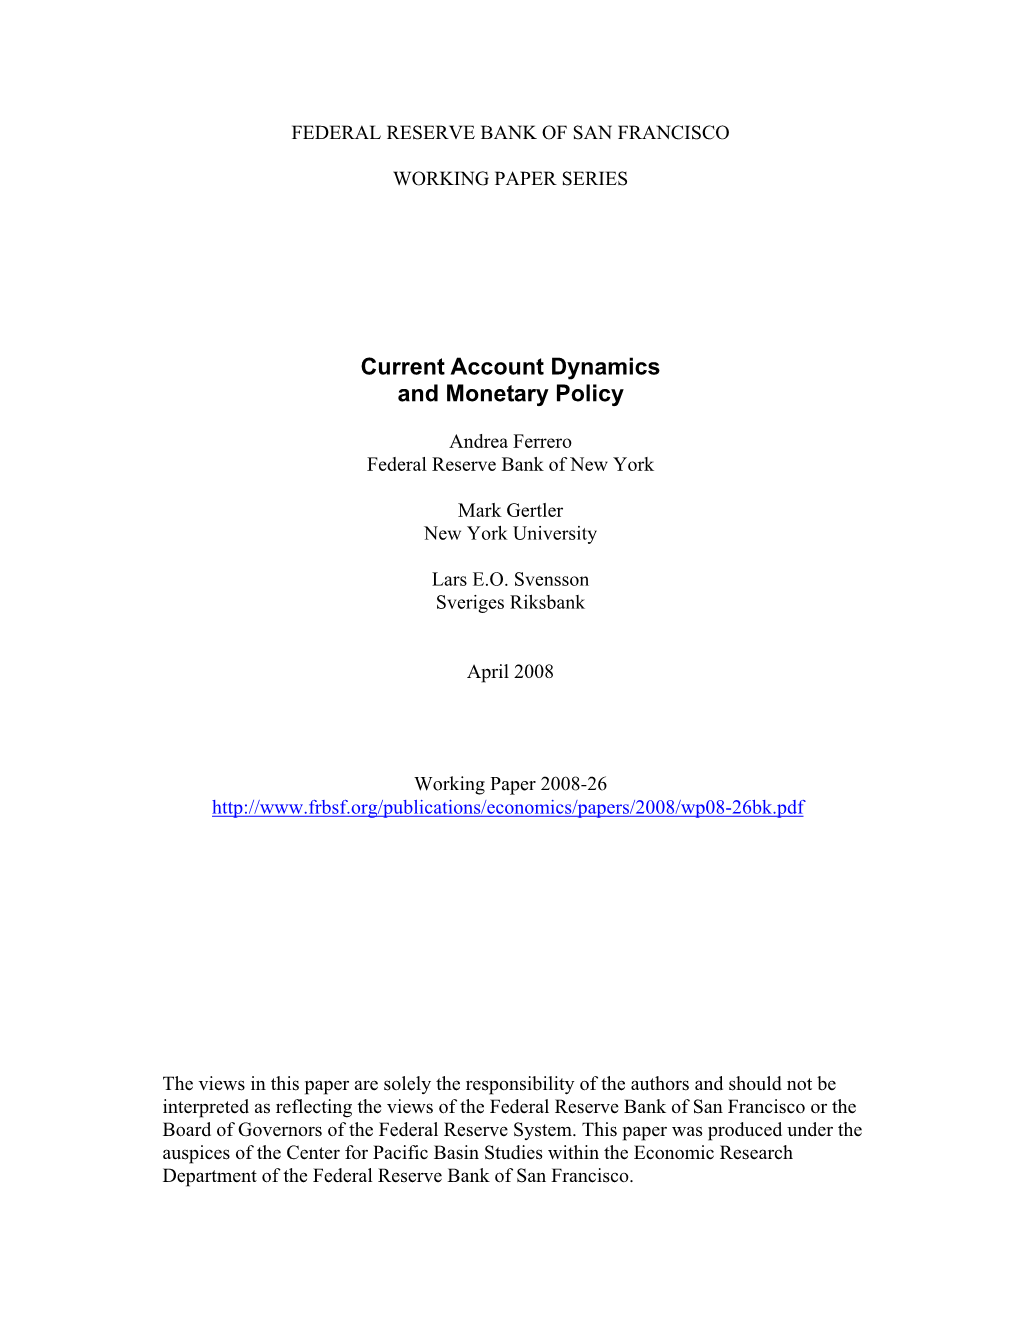 Current Account Dynamics and Monetary Policy